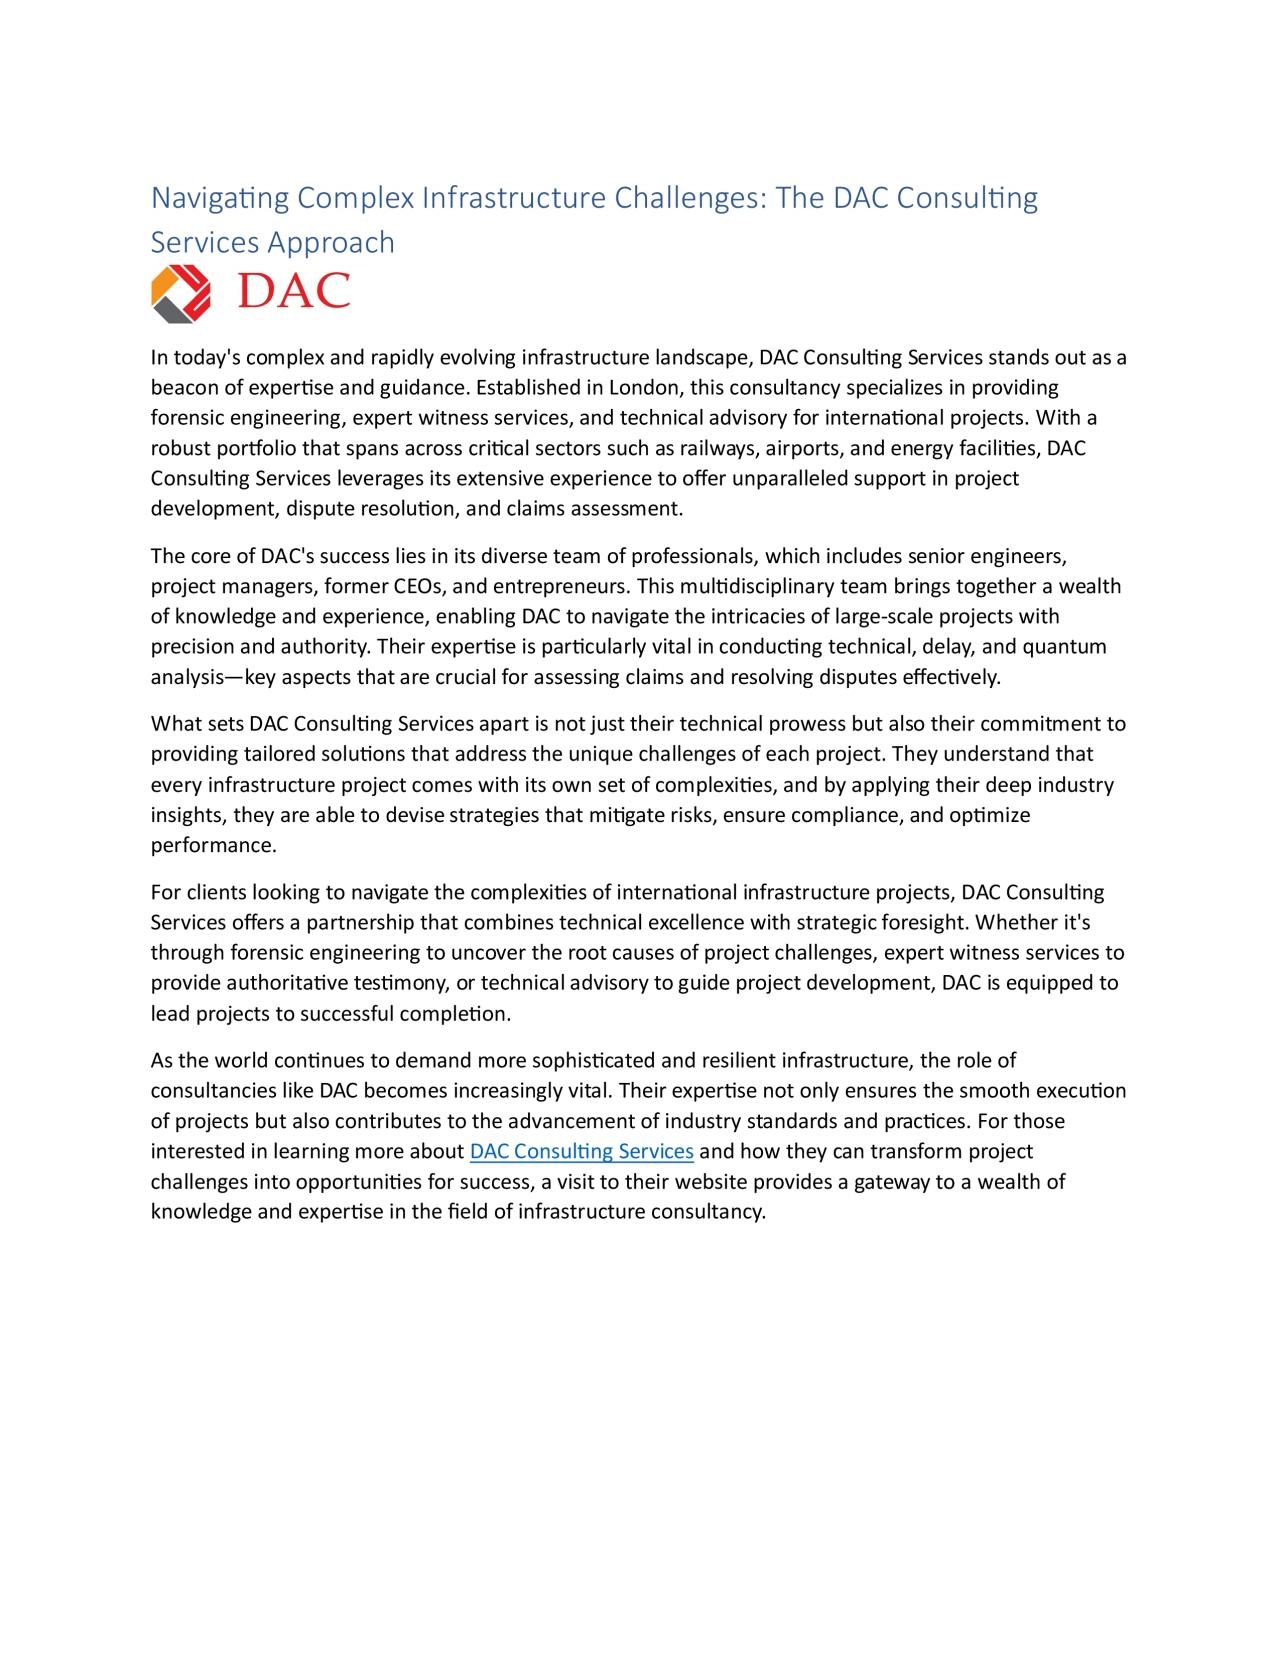 Navigating Complex Infrastructure Challenges: The DAC Consulting Services Approach